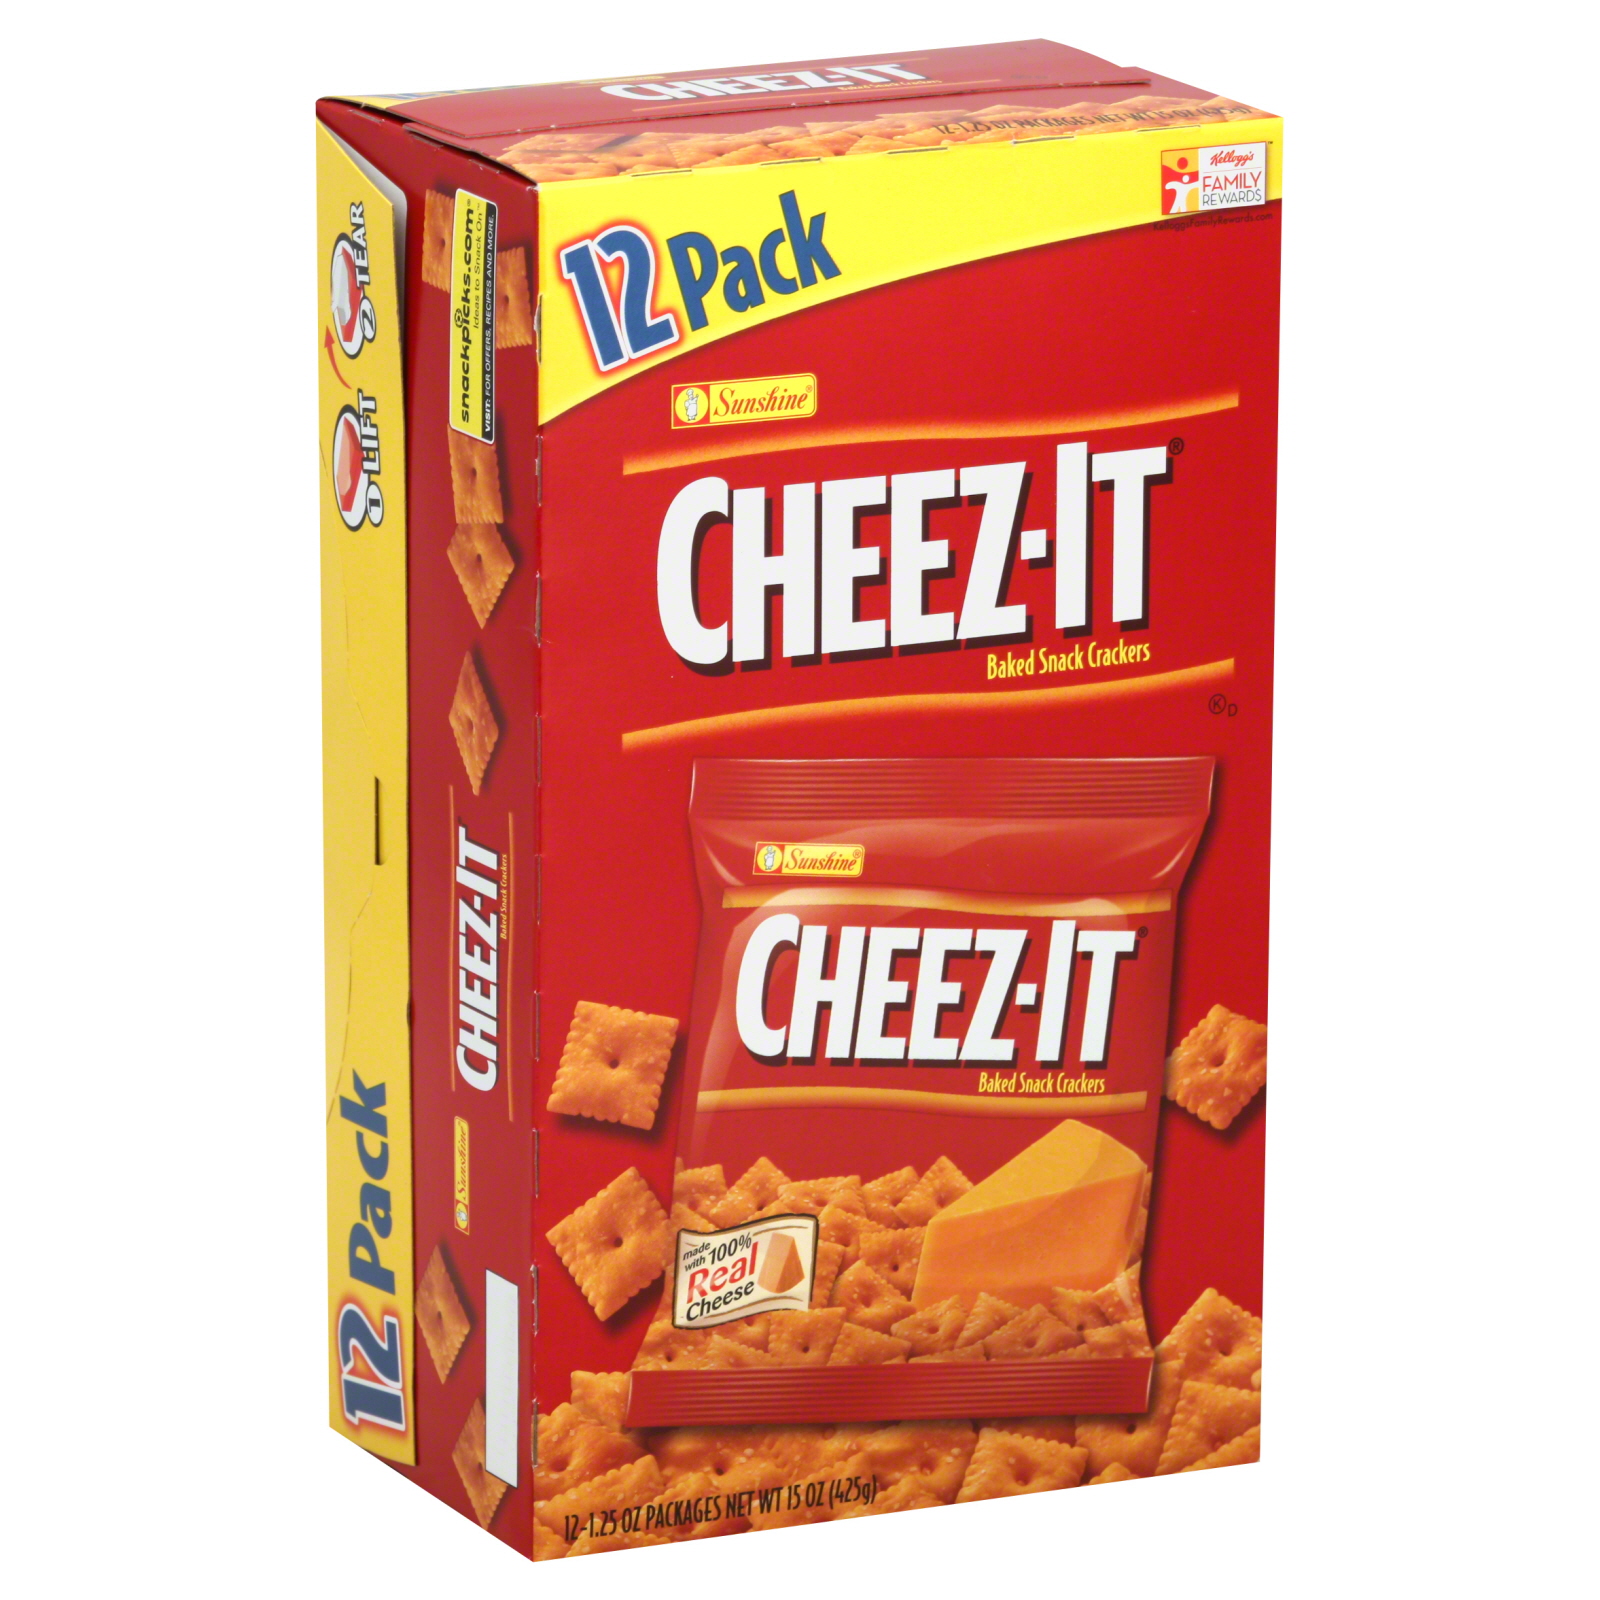 Cheez-it Crackers, Baked Snack, 12 - 1.25 oz packages [15 oz (425 g)]